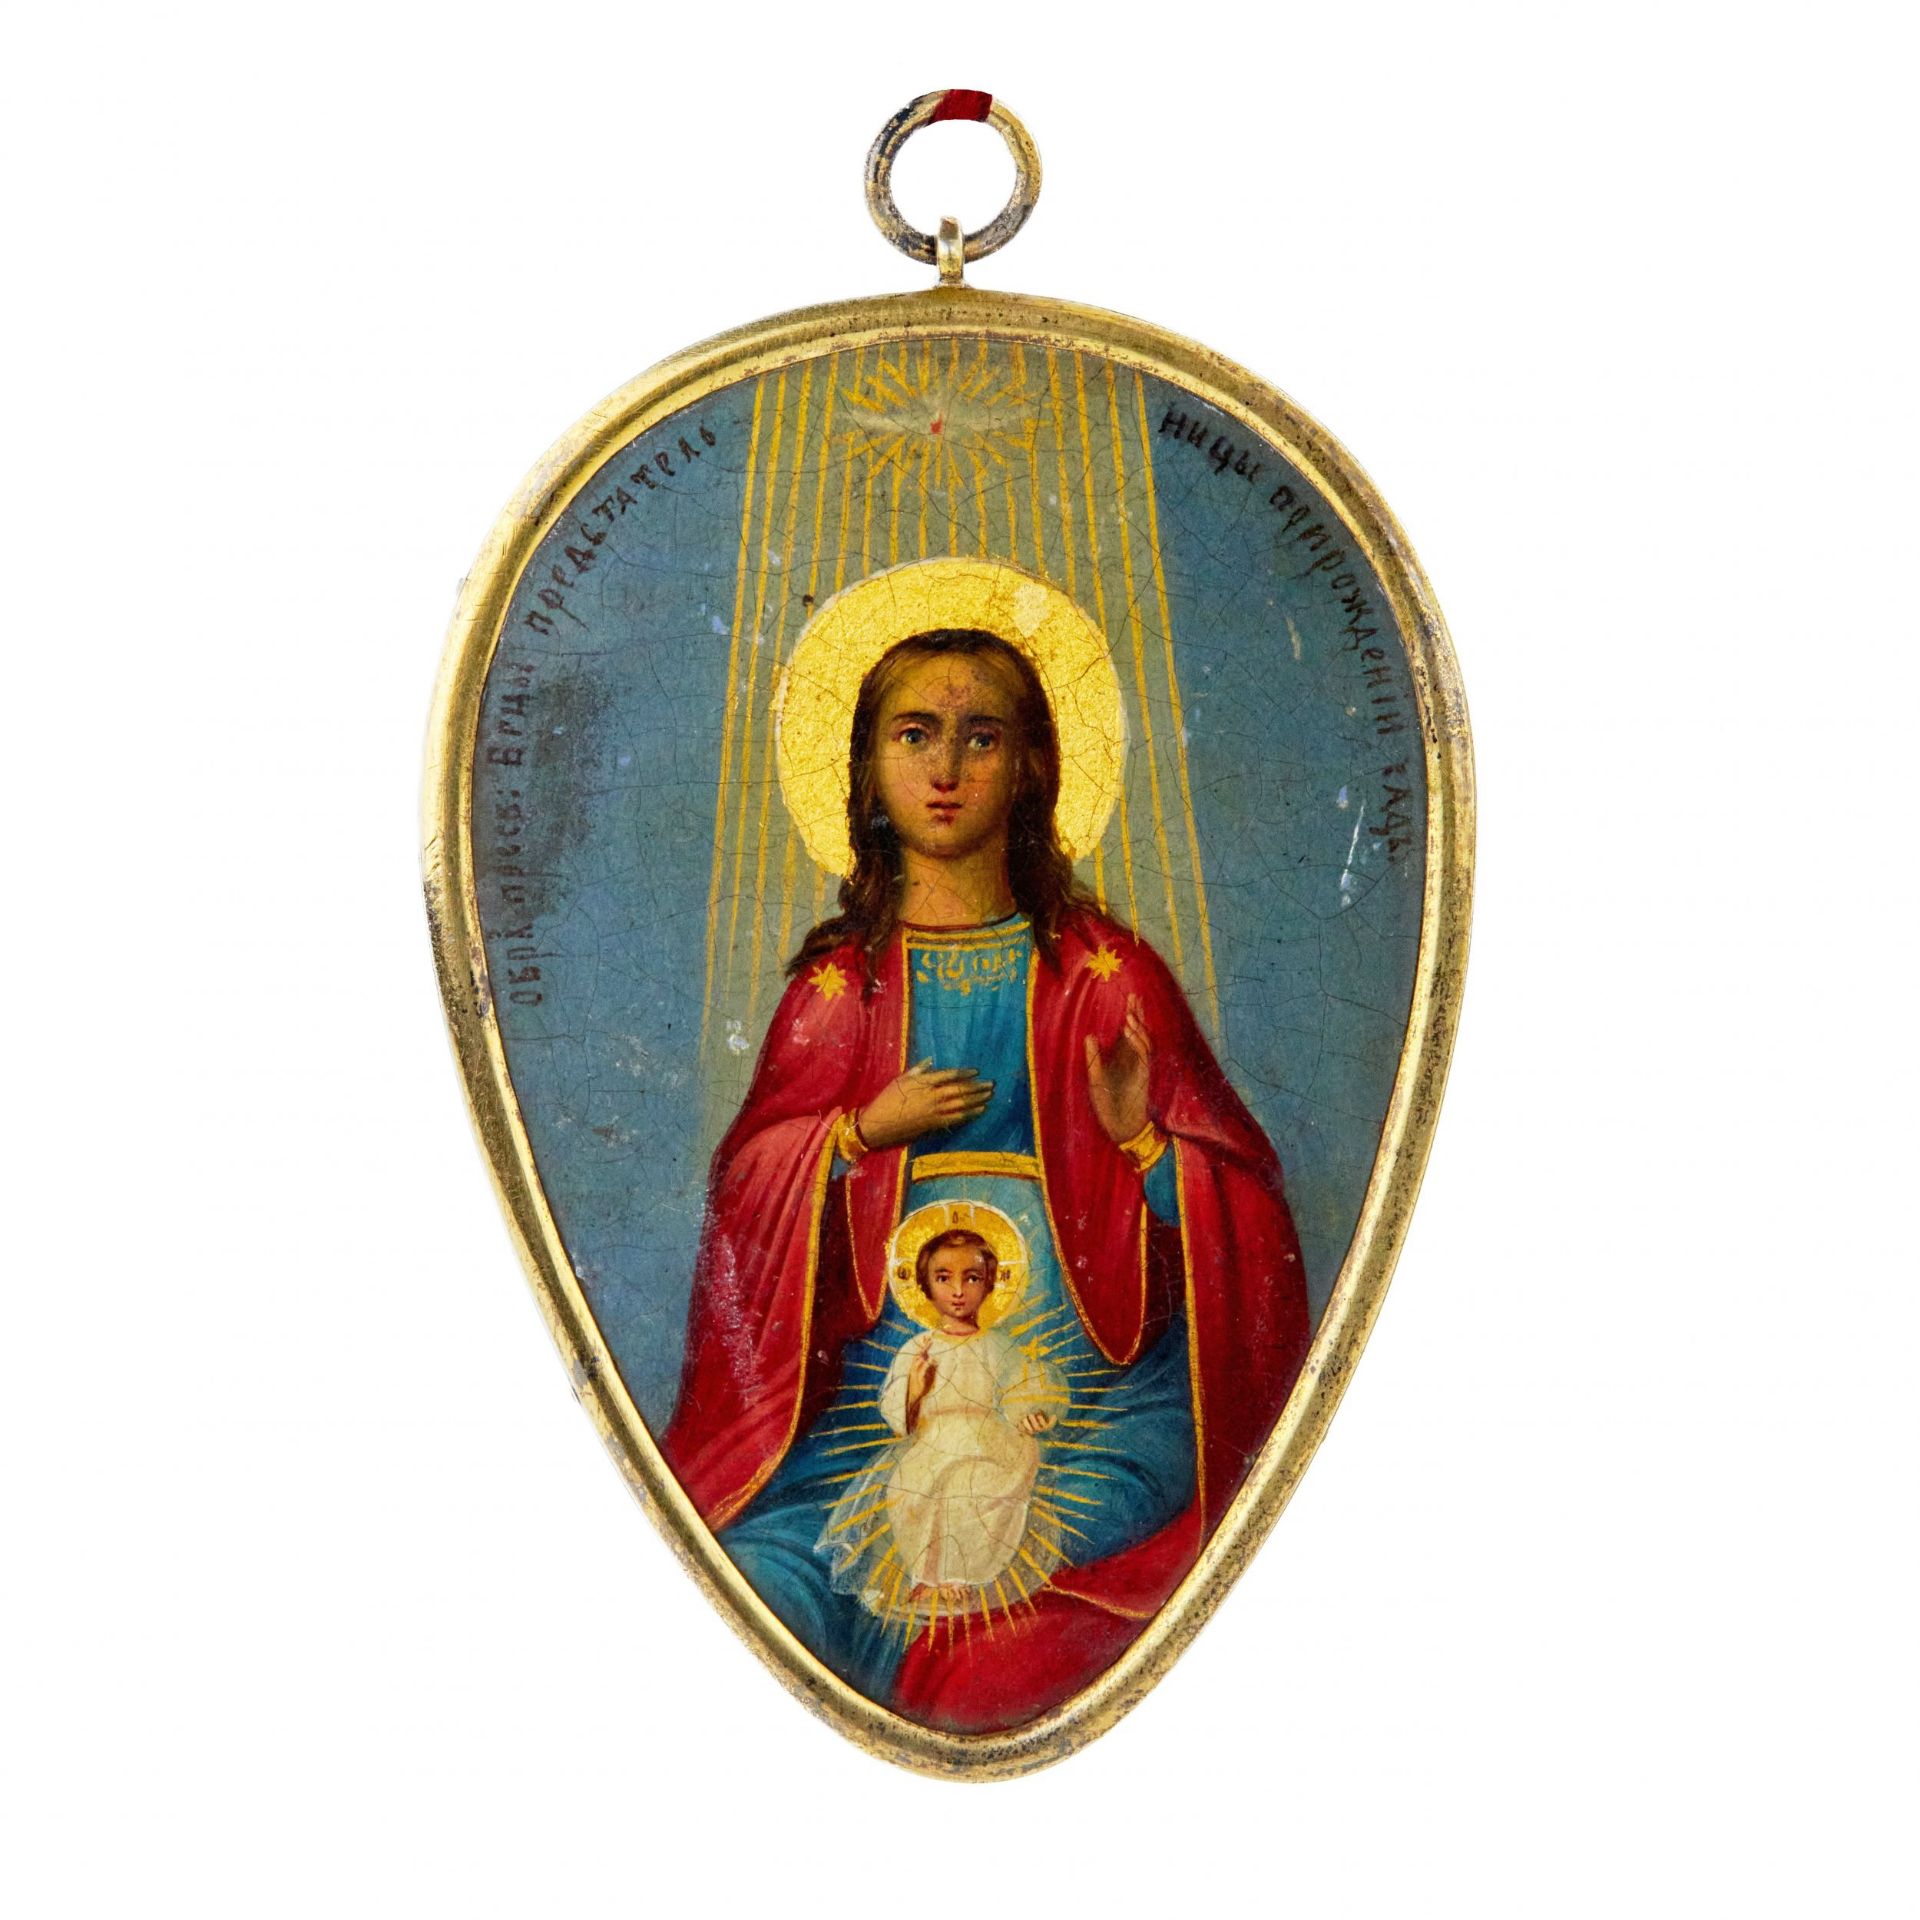 The image of the Mother of God, the Representative at the birth of children.